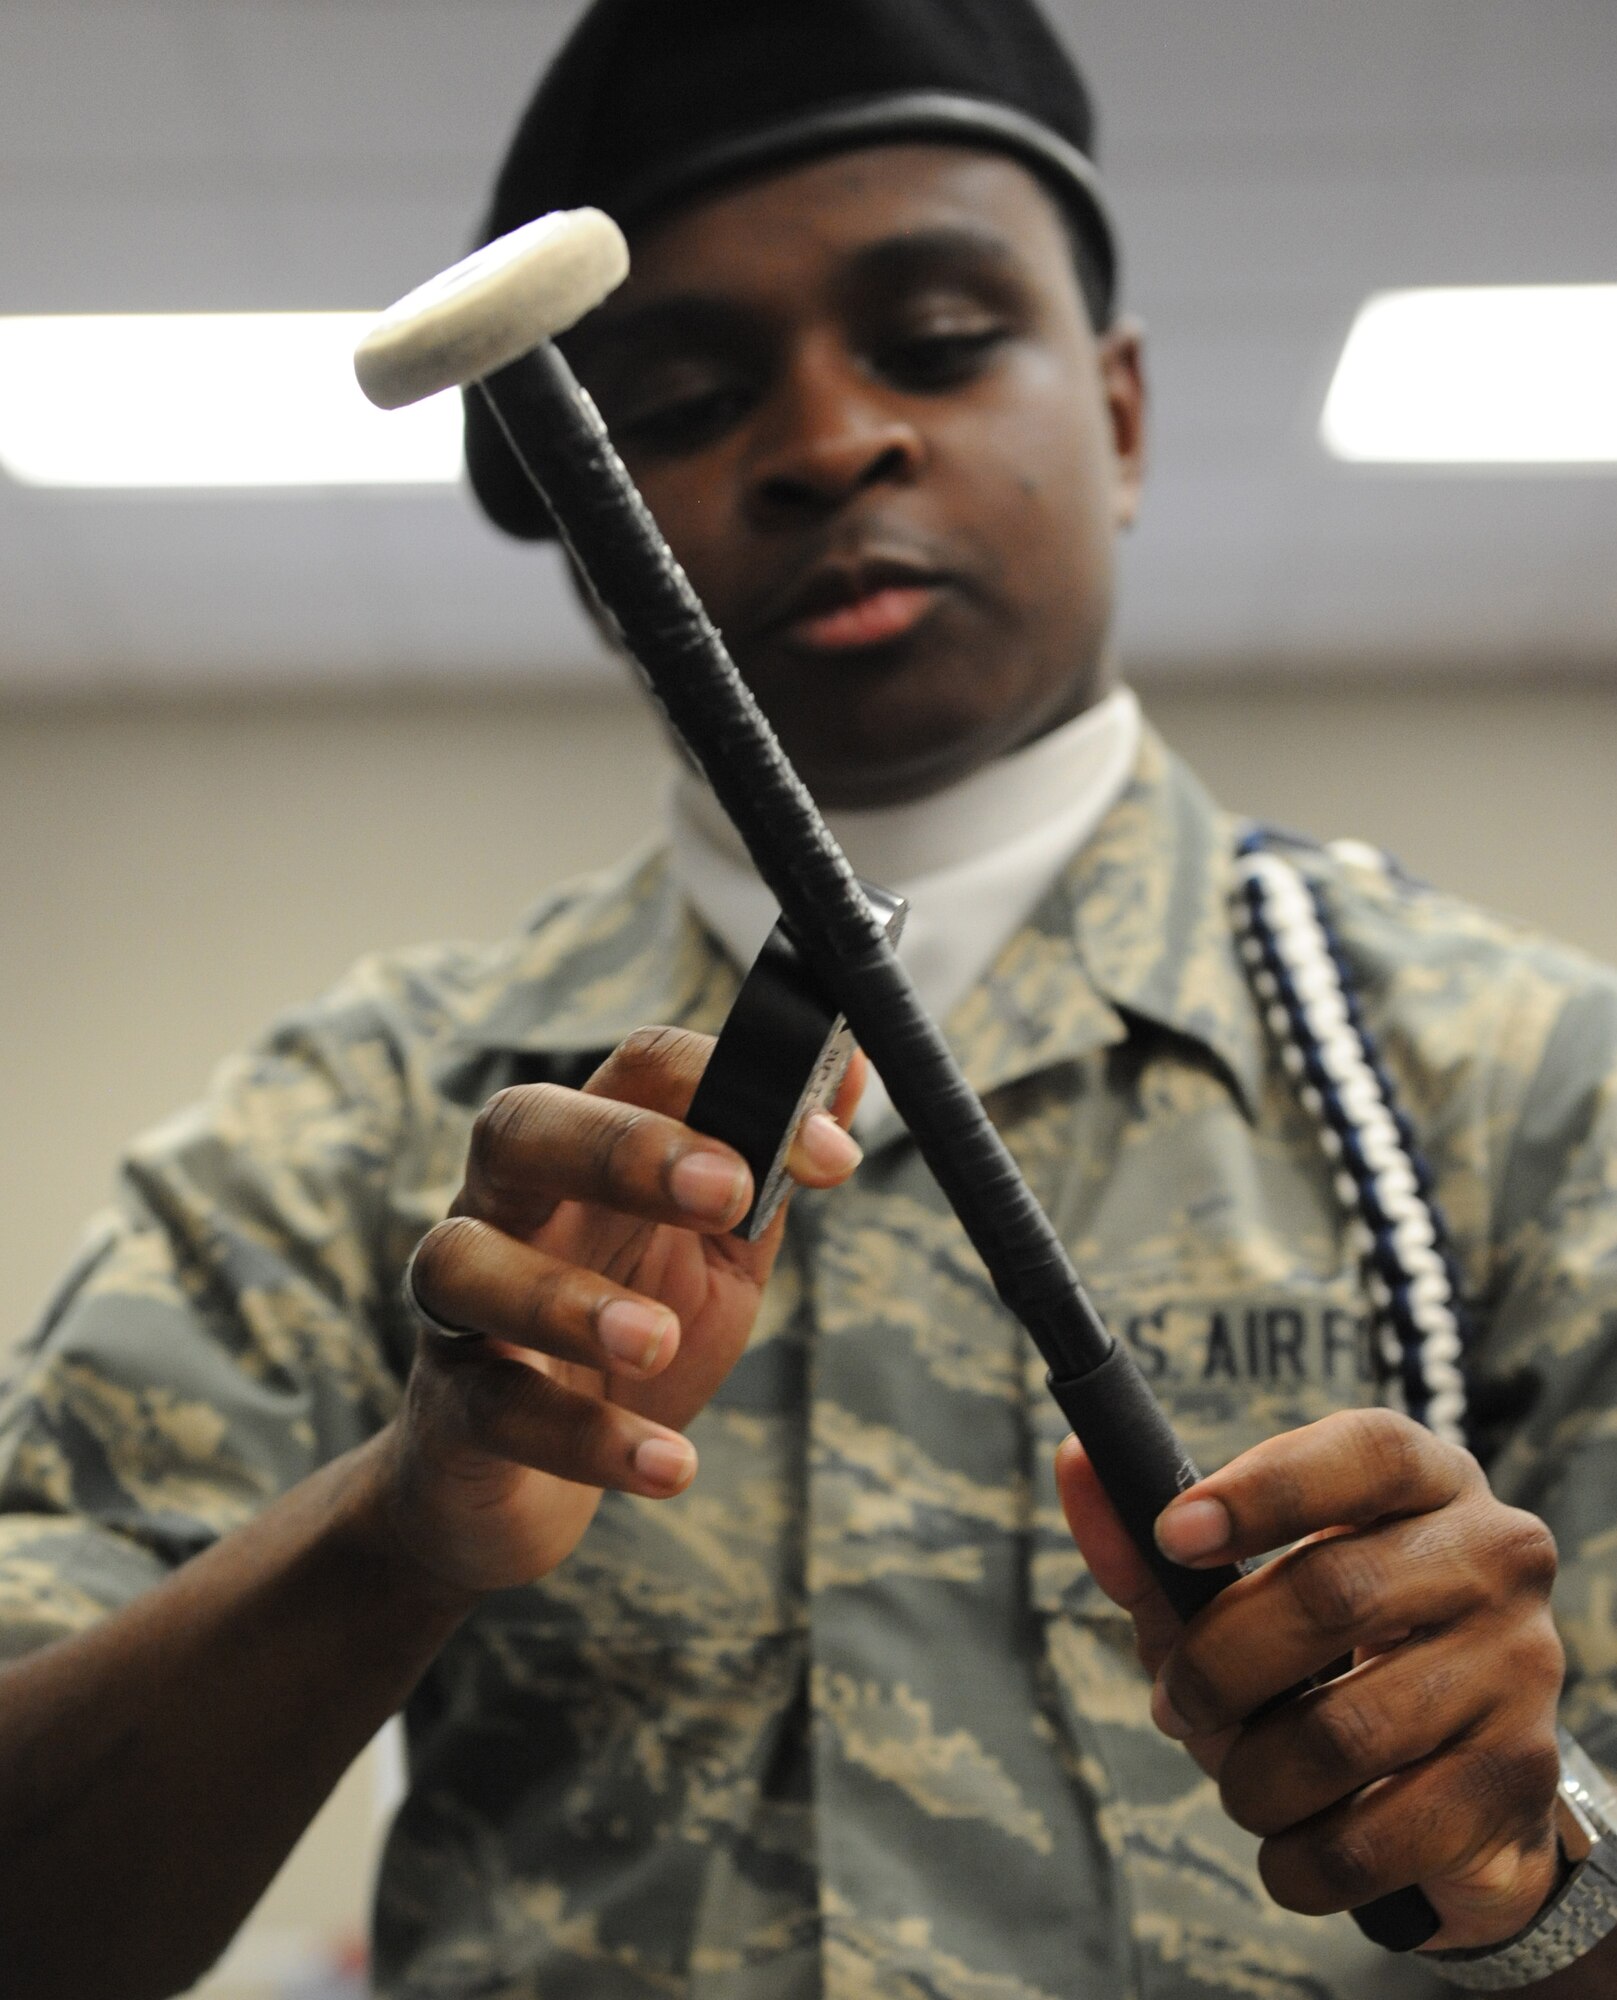 Airman 1st Class Jacari Davis, 81st Training Wing Drum and Bugle Corps snare drum player, repairs the tape on his drum mallets during a practice session at the Levitow Training Support Facility May 31, 2016, Keesler Air Force Base, Miss. The drum and bugle corps performs at various events such as 81st Training Group student parades and drill downs in addition to attending Air Force specialty code technical training on a daily basis. (U.S. Air Force photo by Kemberly Groue)